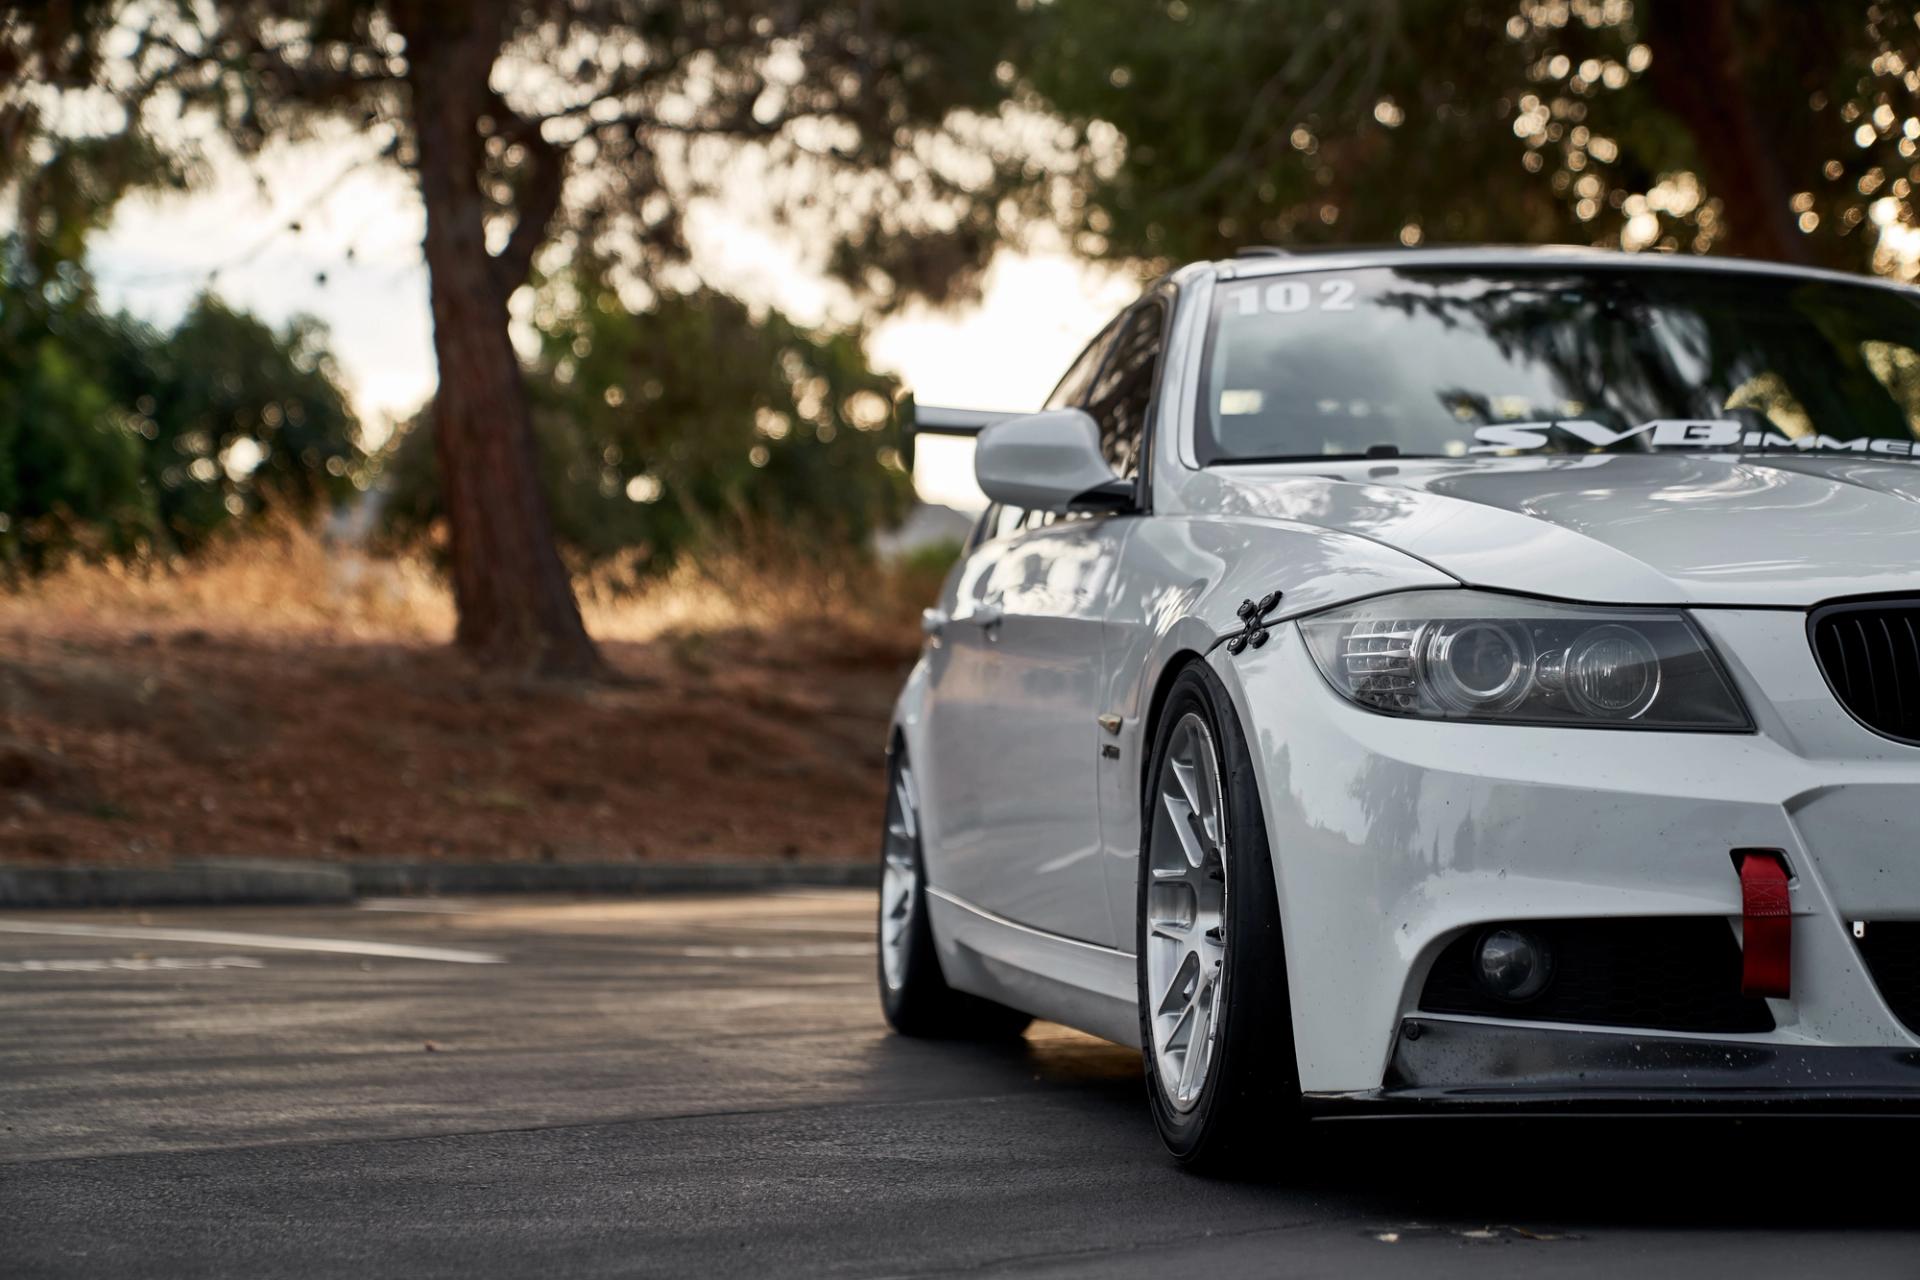 BMW E90 LCI Sedan 3 Series with 17" ARC-8R in Brushed Clear